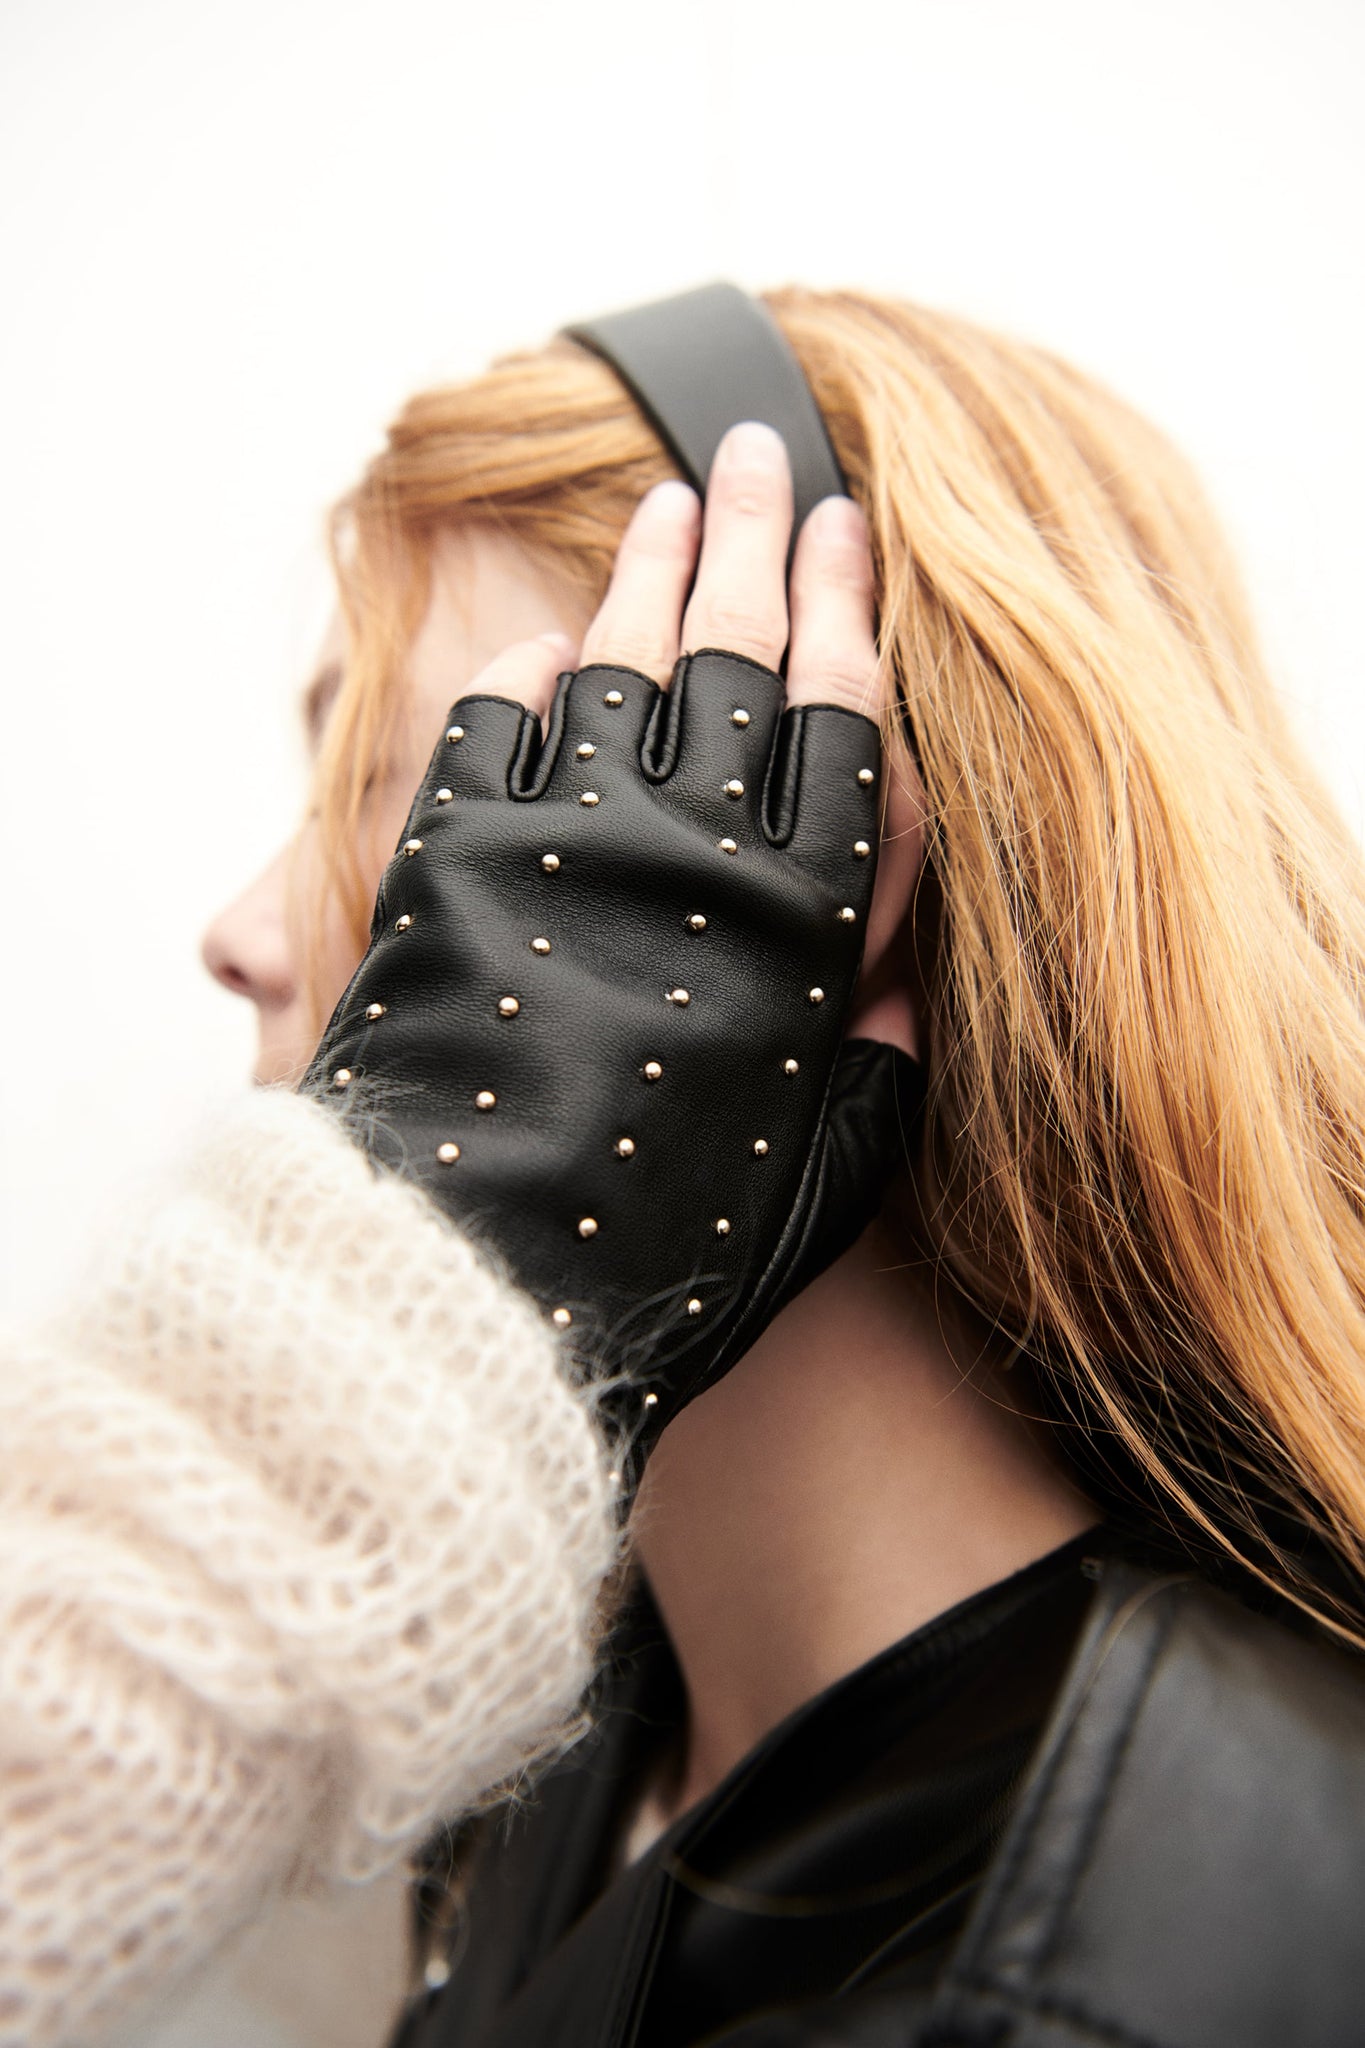 Functional Yet Fashionable: Gloves, Scarves, and More